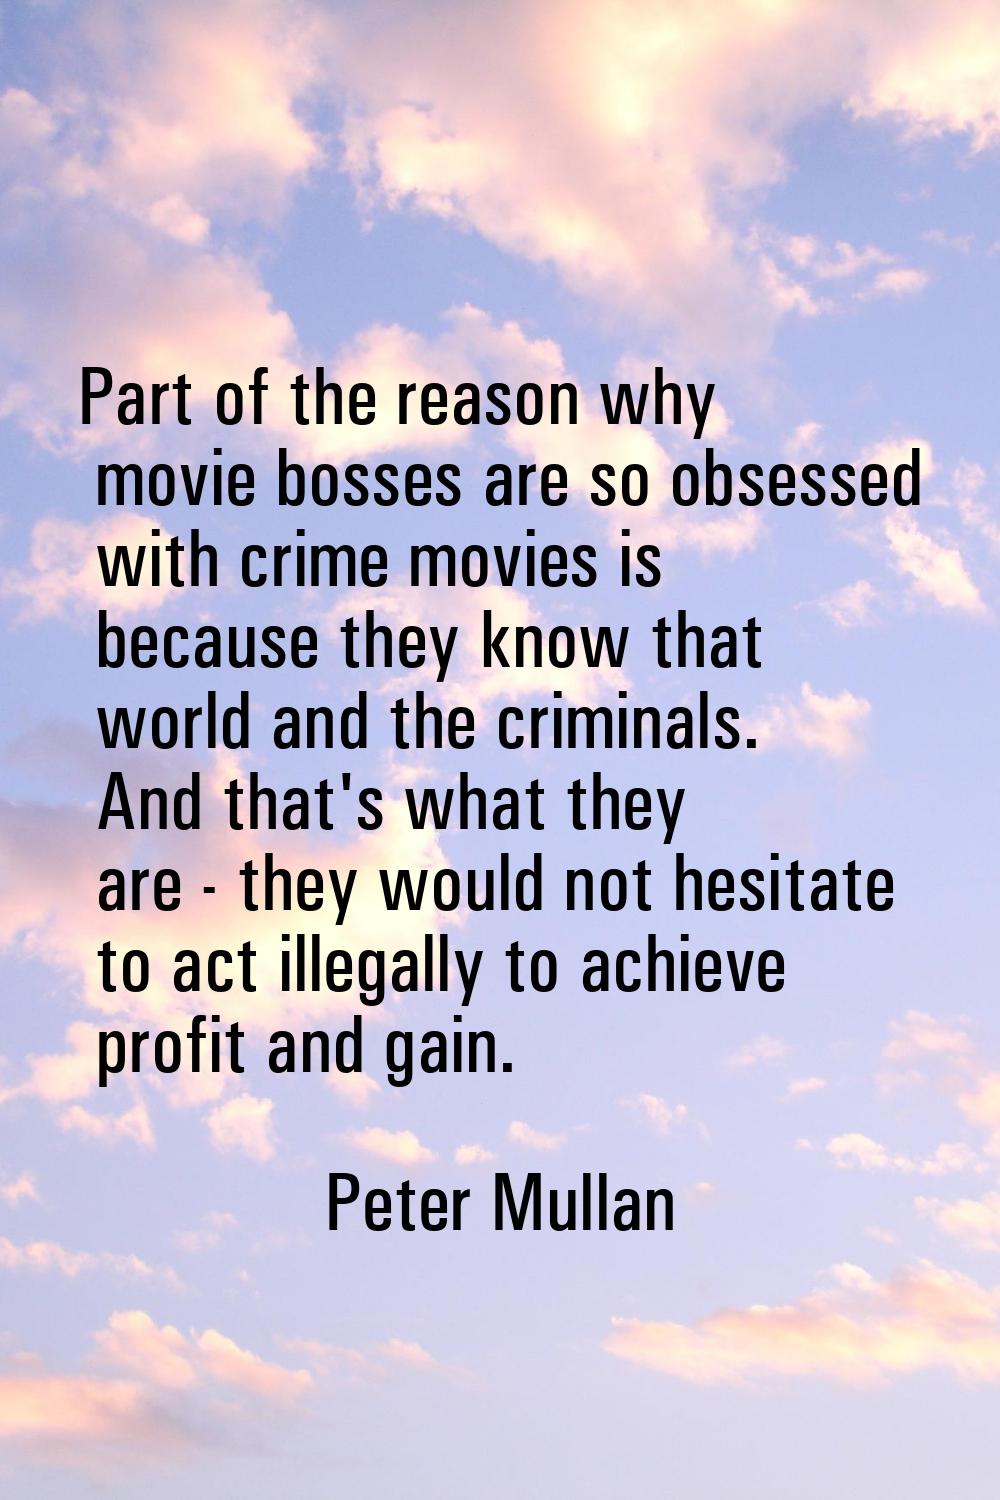 Part of the reason why movie bosses are so obsessed with crime movies is because they know that wor